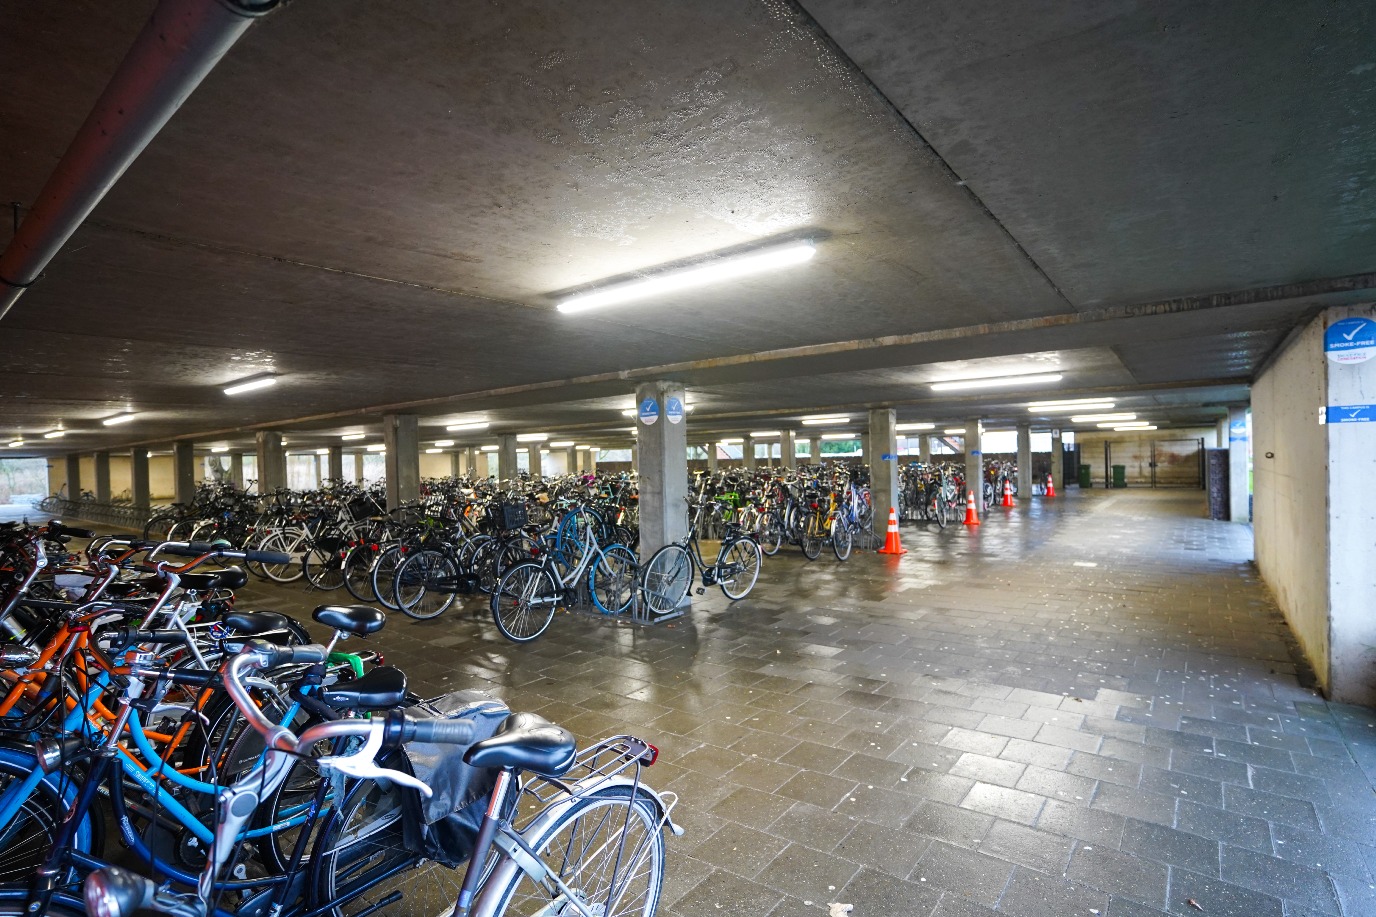 Bicycle parking, under building next to exam entrance